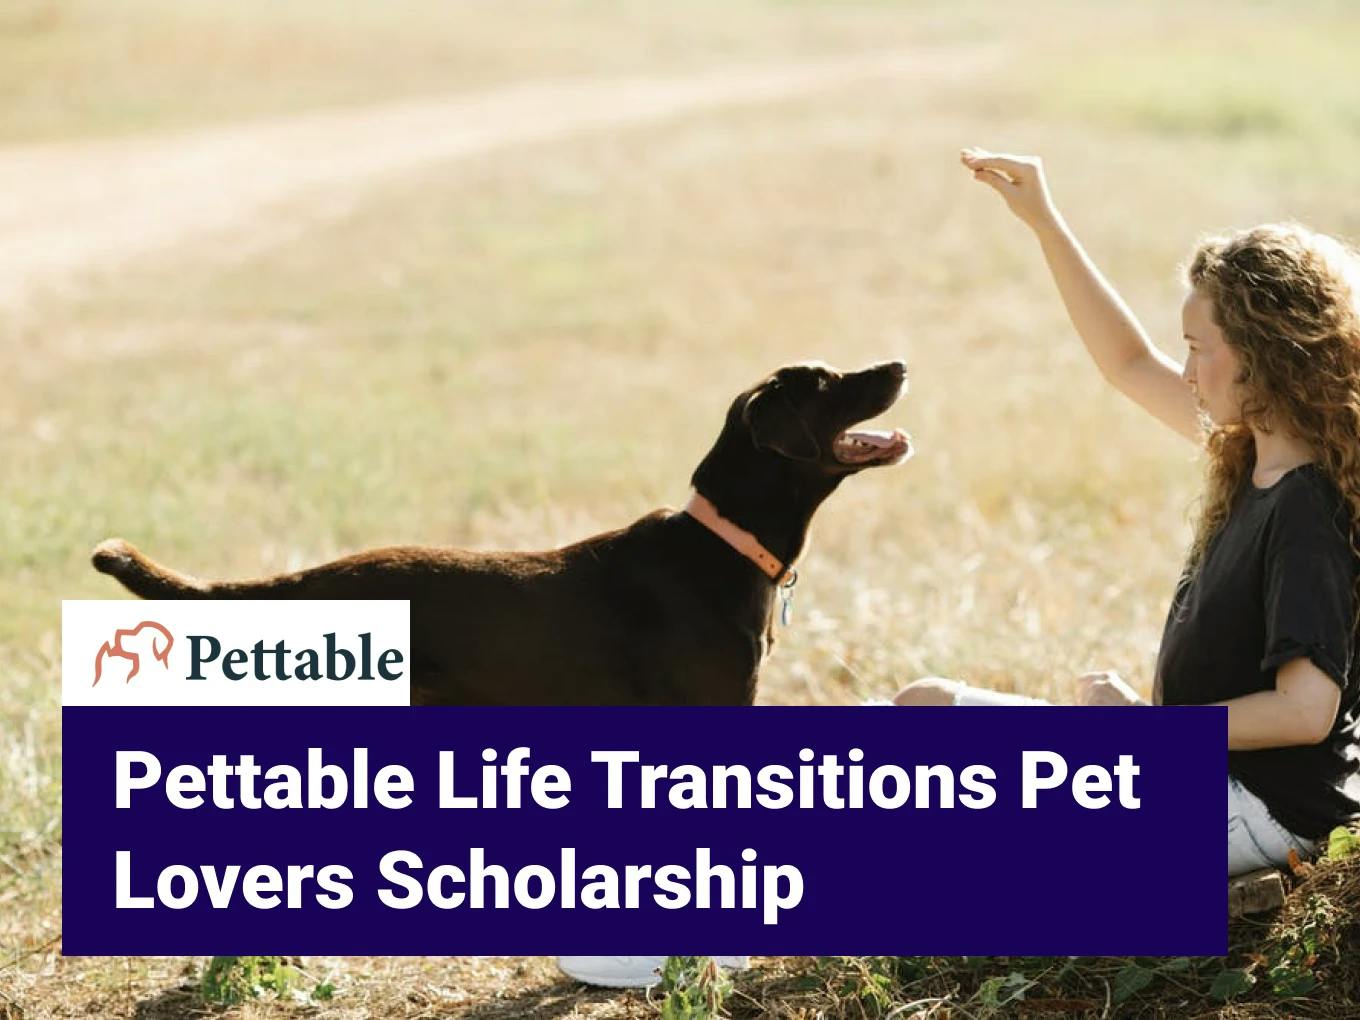 Pettable Life Transitions Pet Lovers Scholarship